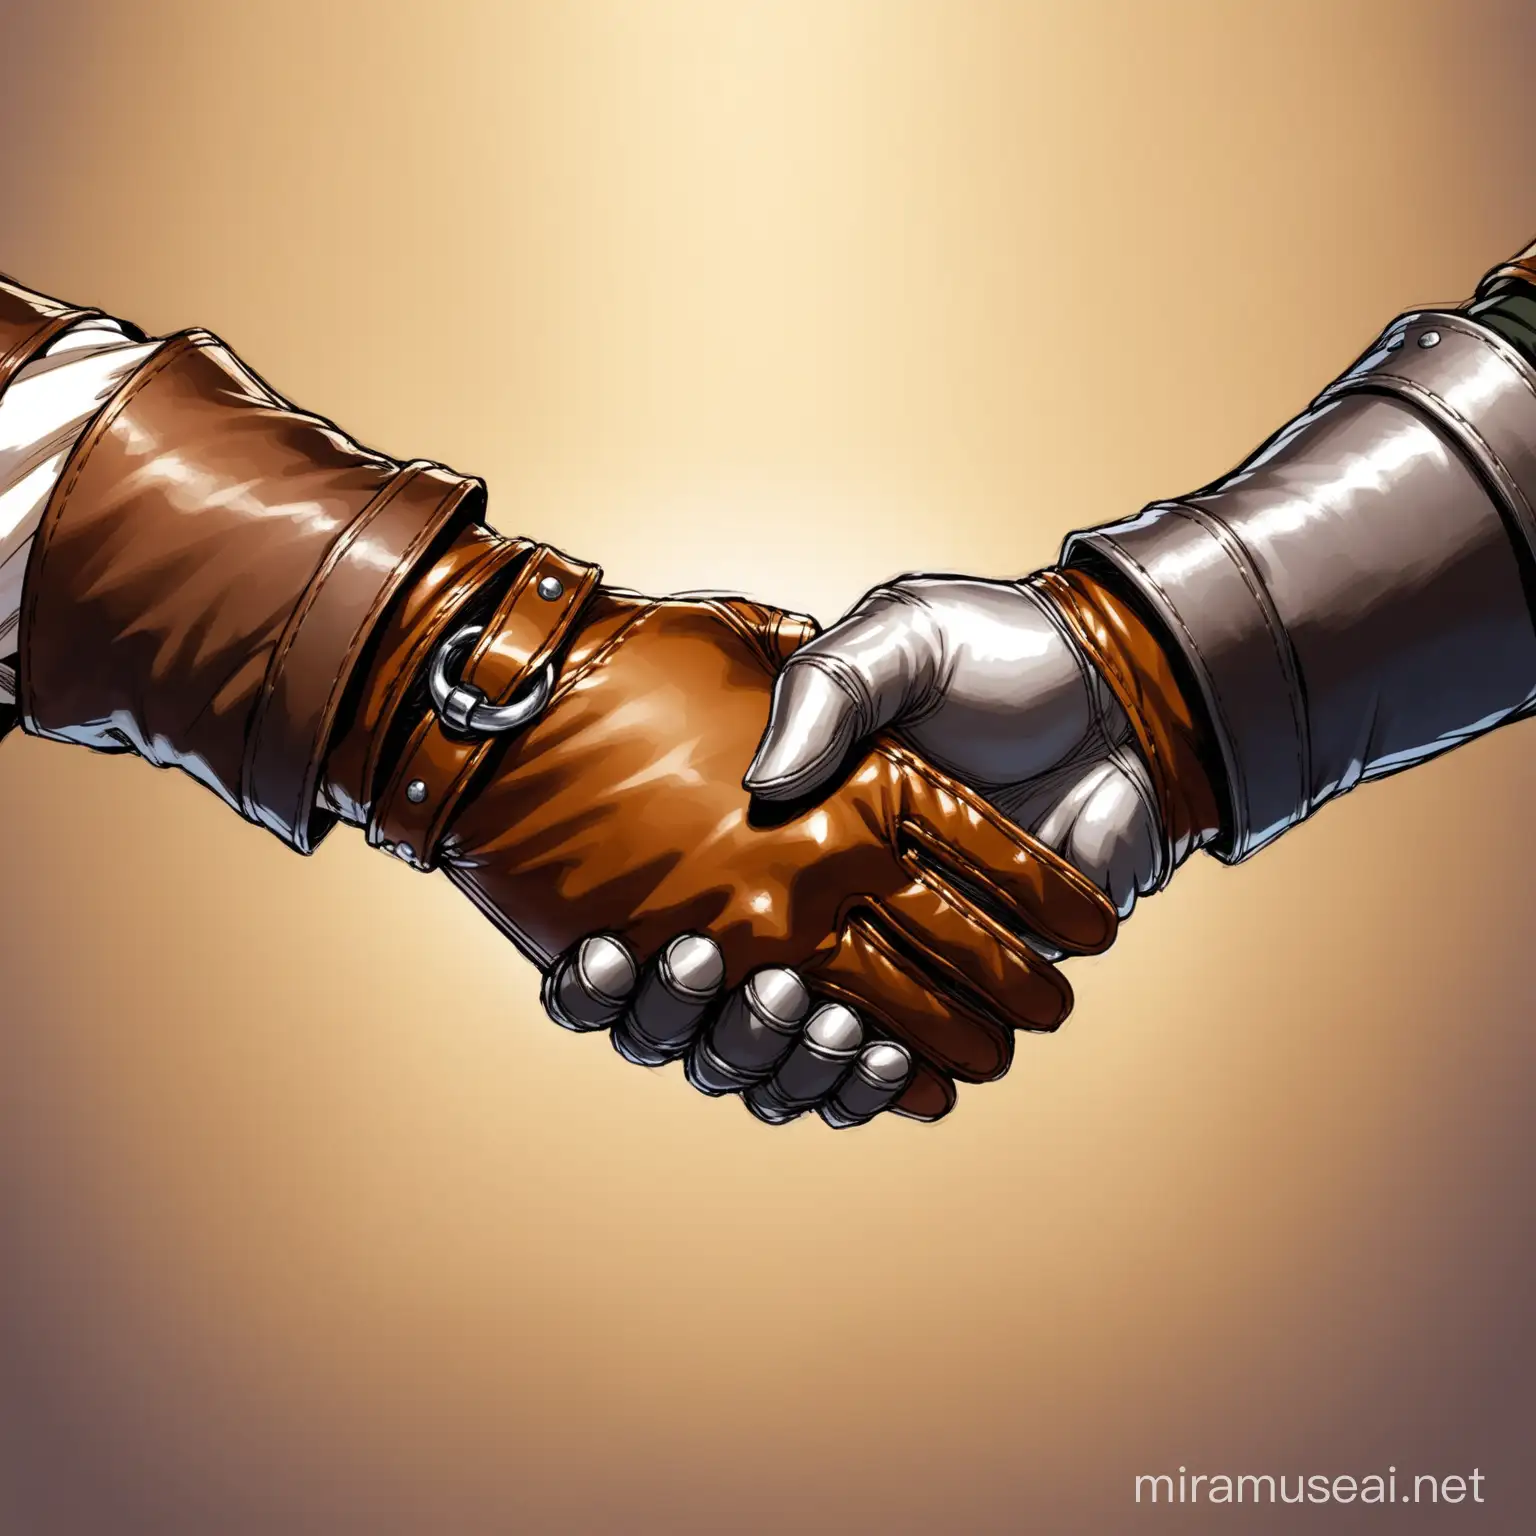 medieval leather gloves, two hands, buddy hand shake grip, companion